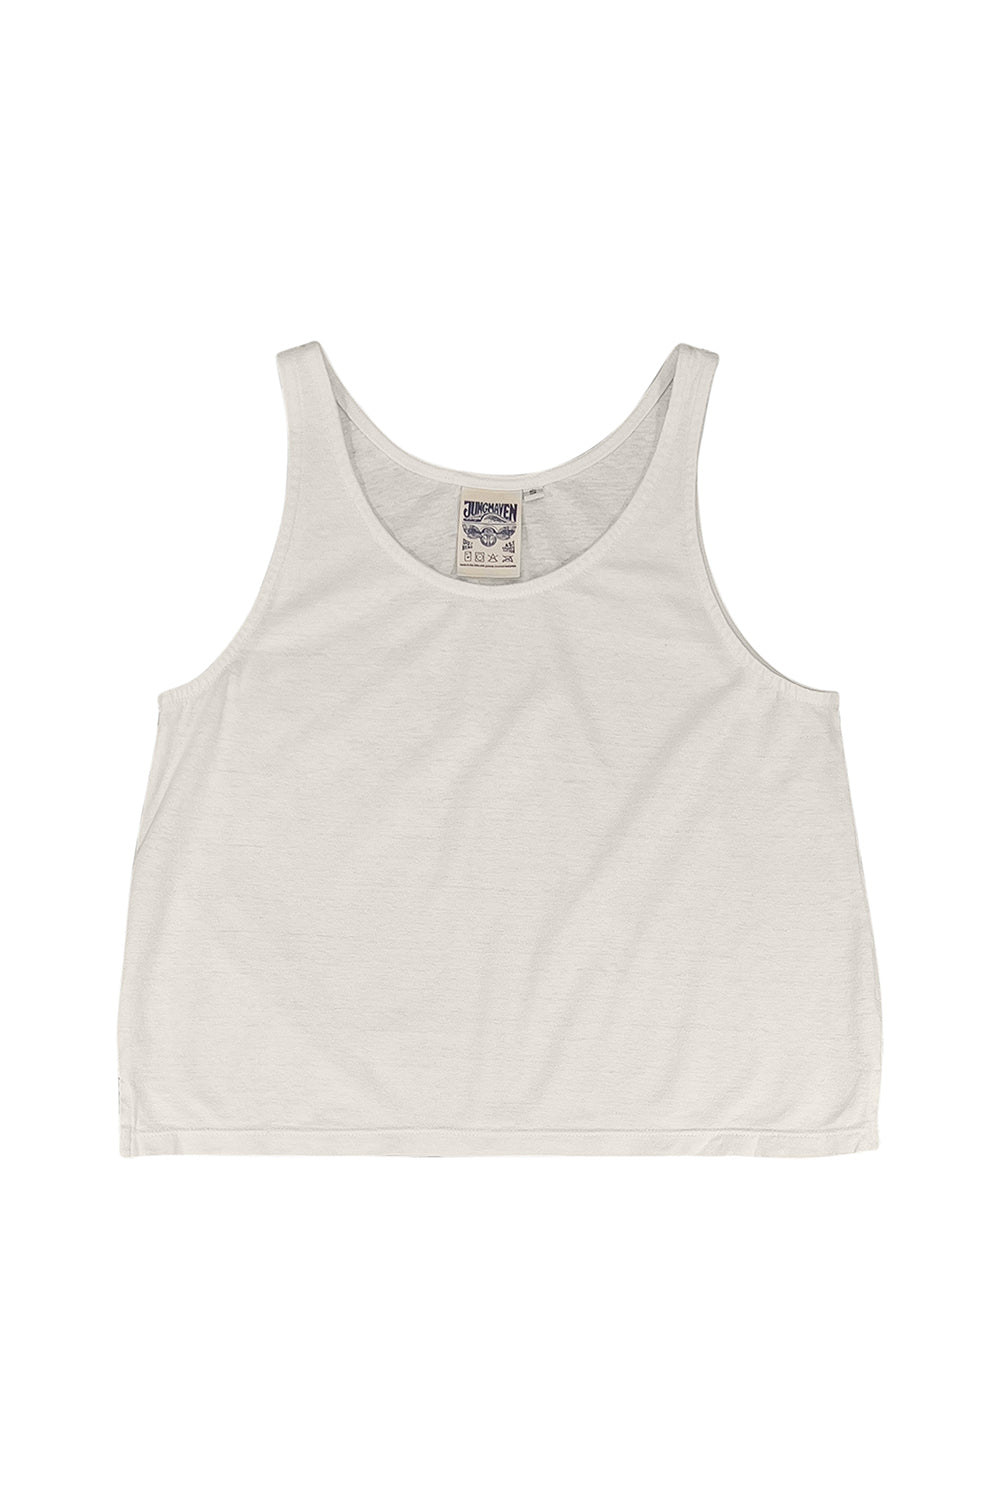 Cropped Tank | Jungmaven Hemp Clothing & Accessories / Color: Washed White